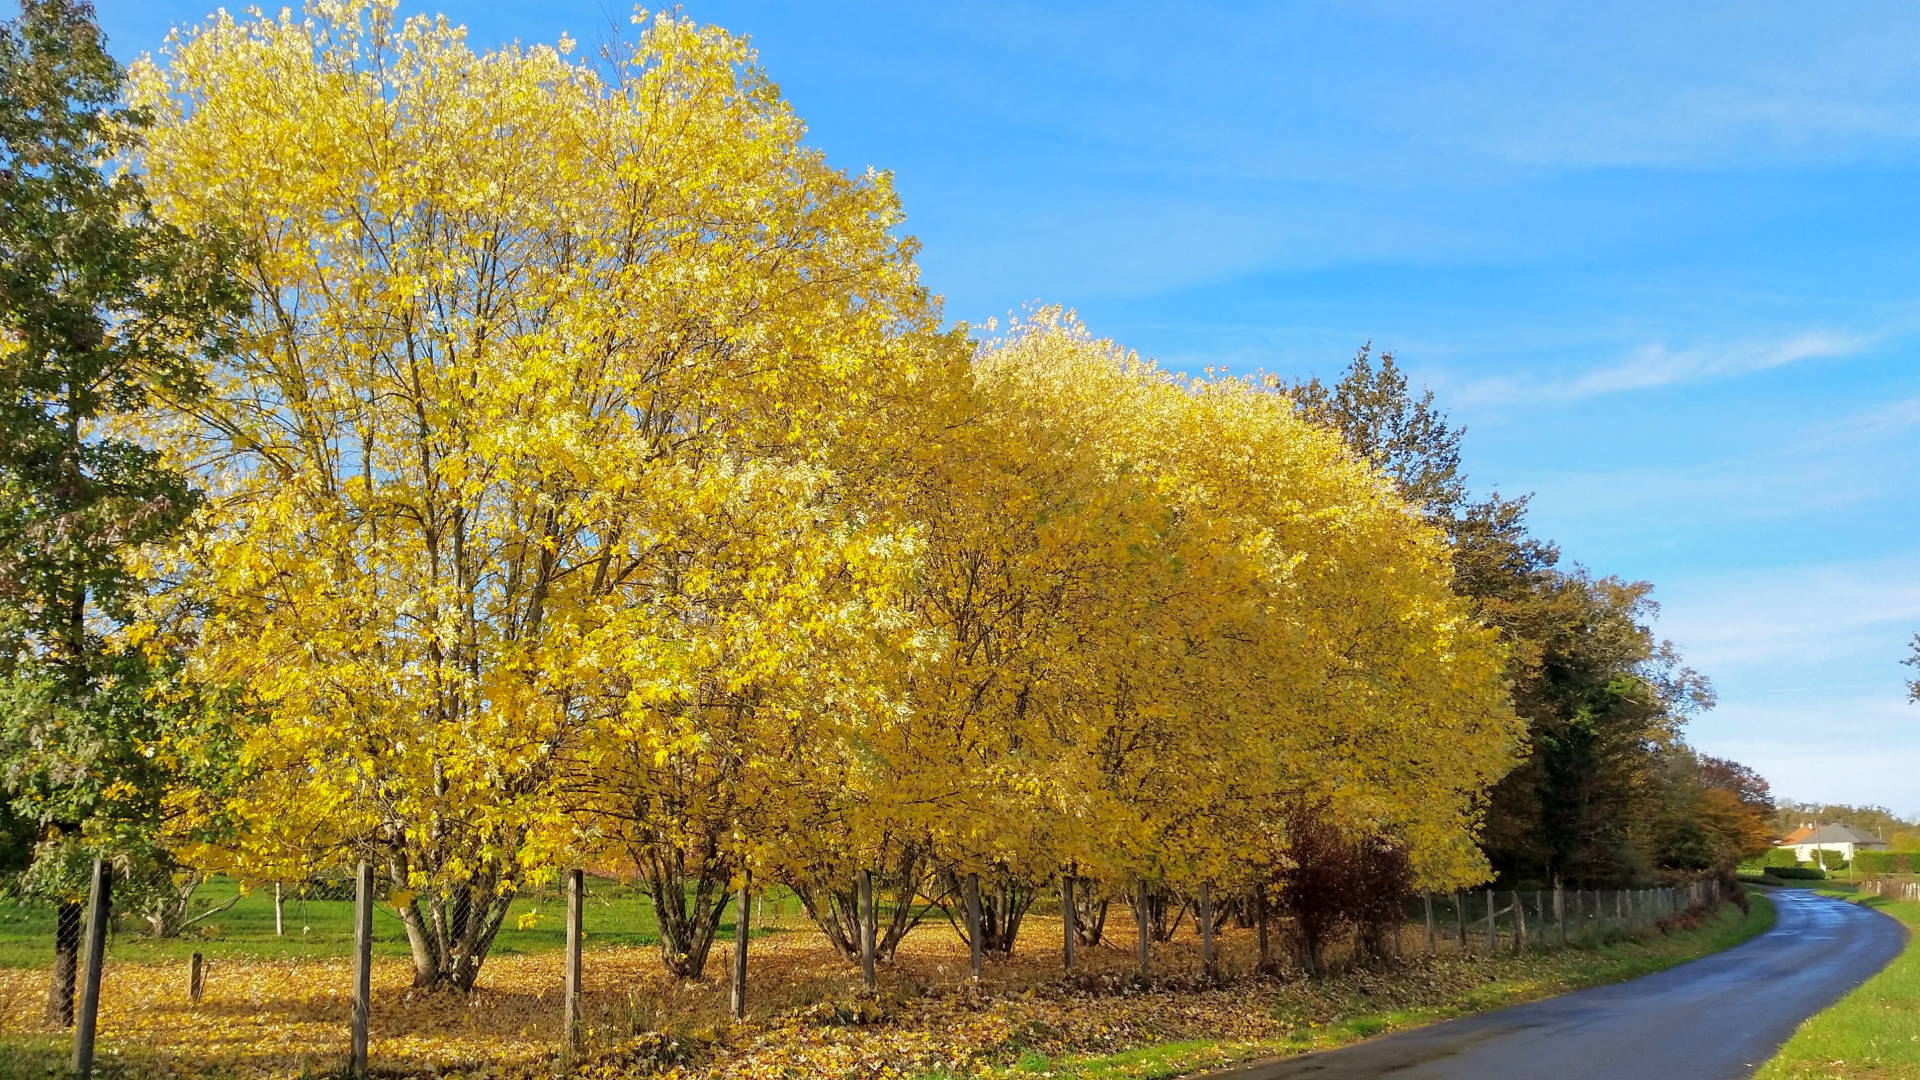 Trees with golden yellow leaf colours on a sunny autumn day